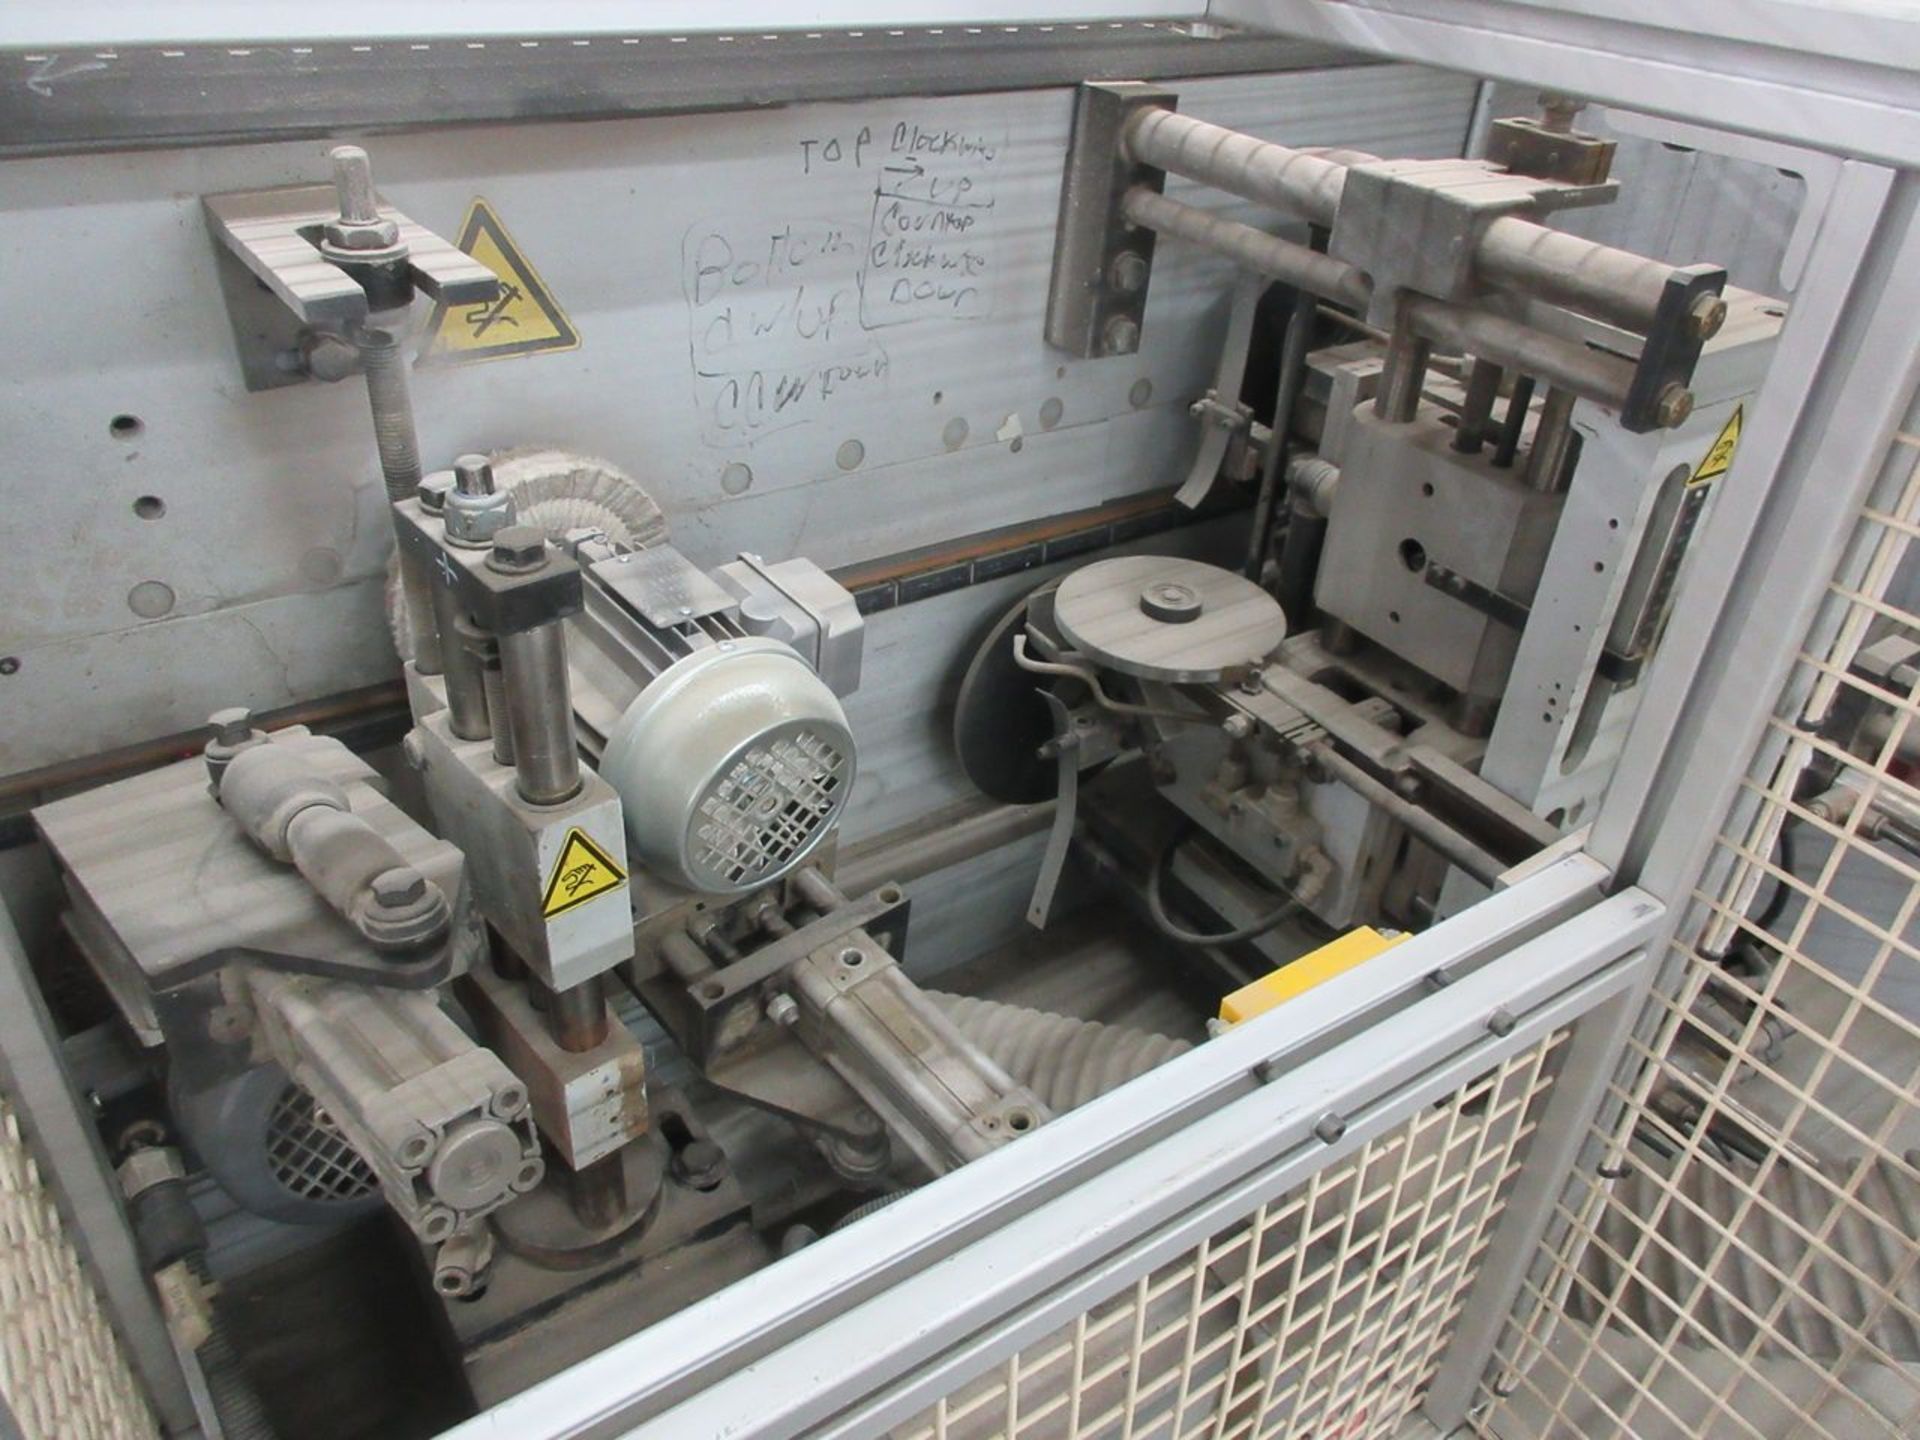 Homag KL76/A20 Single End Edge Bander, S/N: 0-200-08-4020 (1999); with Coil Feed Reel, Glue Station, - Image 8 of 13